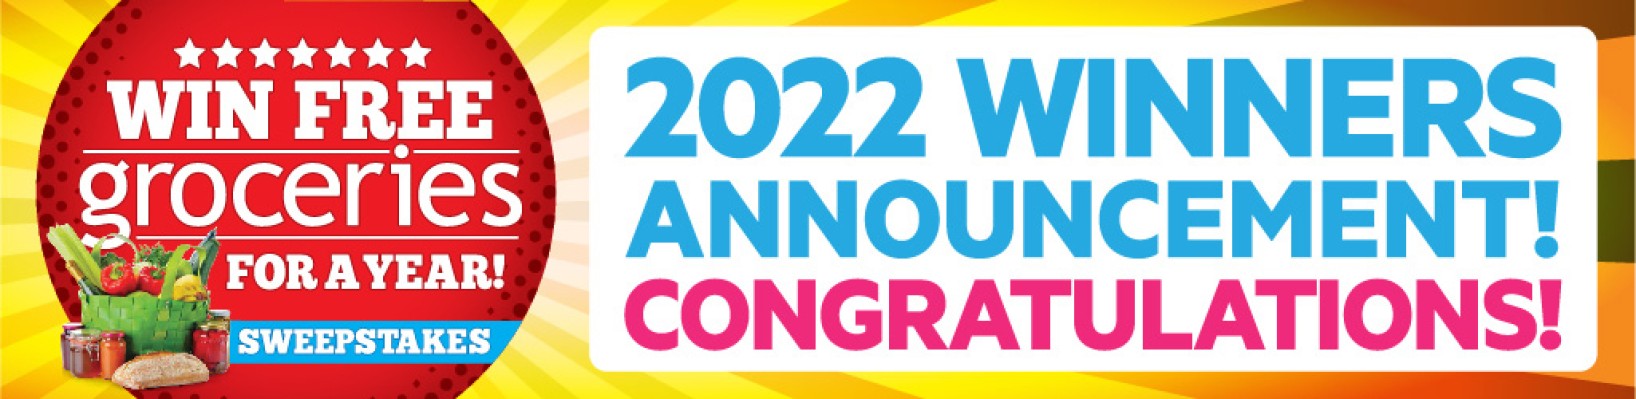 Win Free Groceries for a Year - 2022 Winner Announcement!